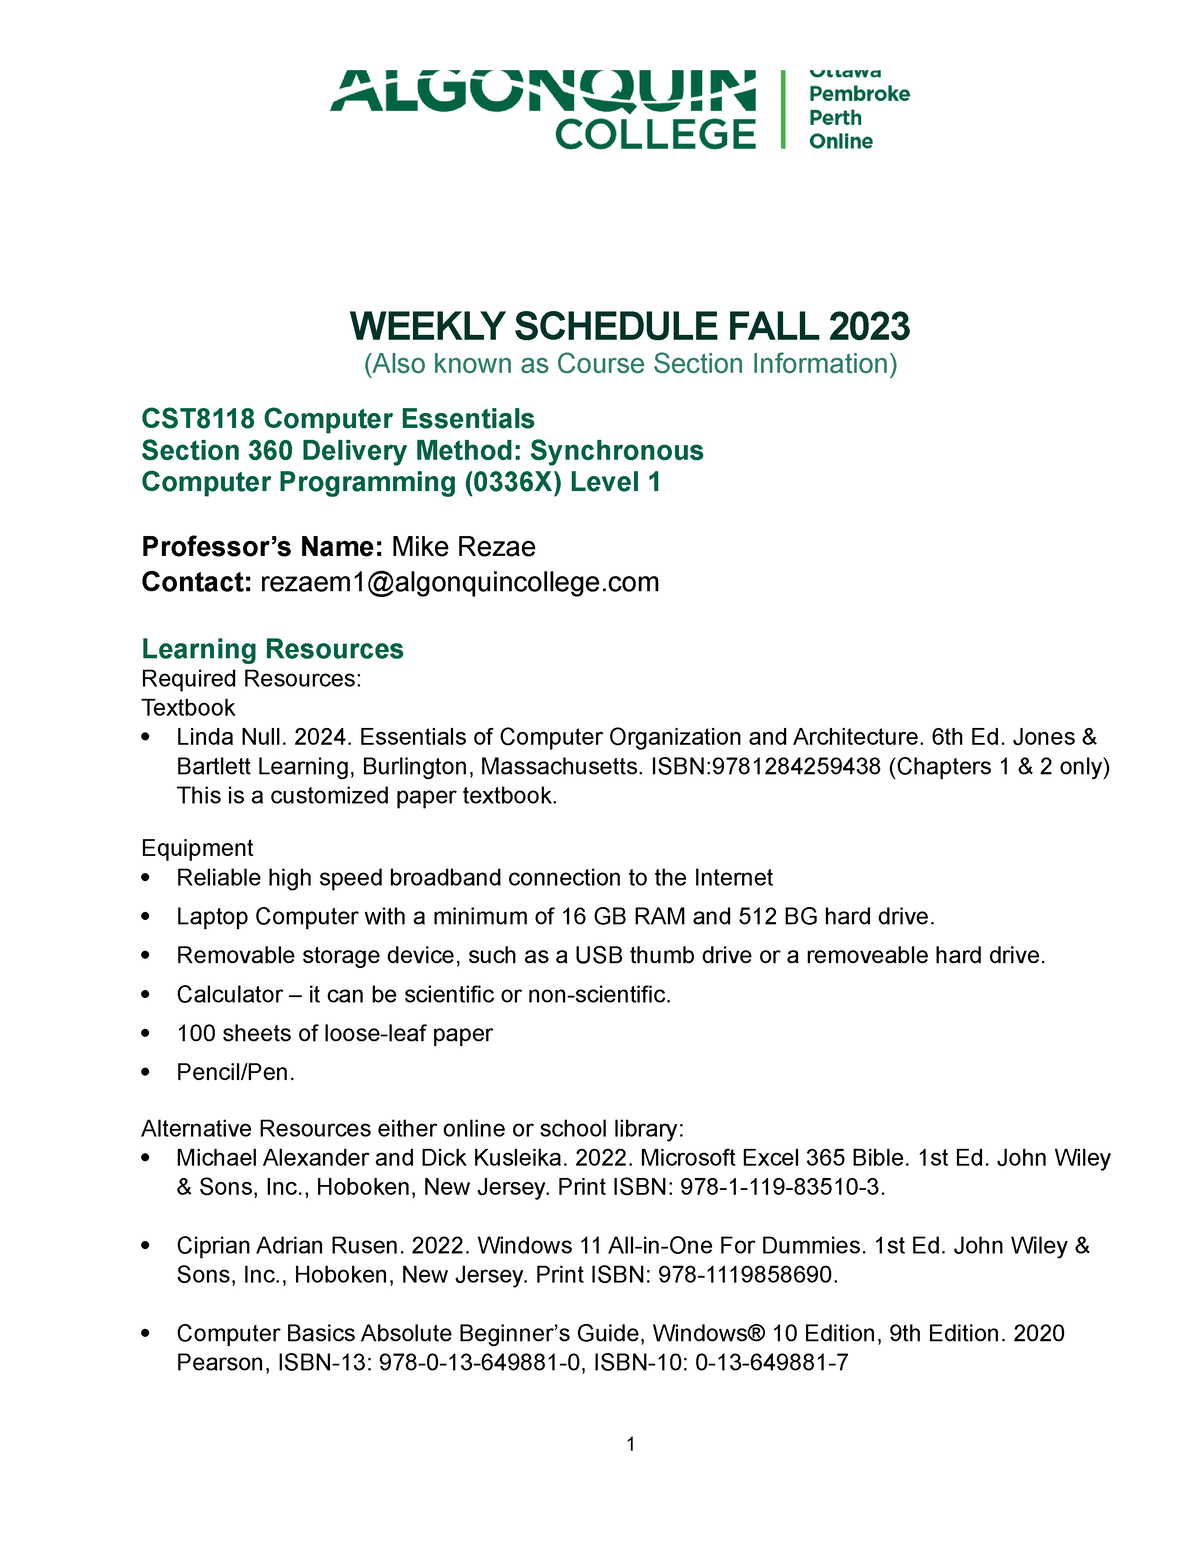 CST8118 Weekly Schedule (CSI) Fall 2023 Template& Draft WEEKLY